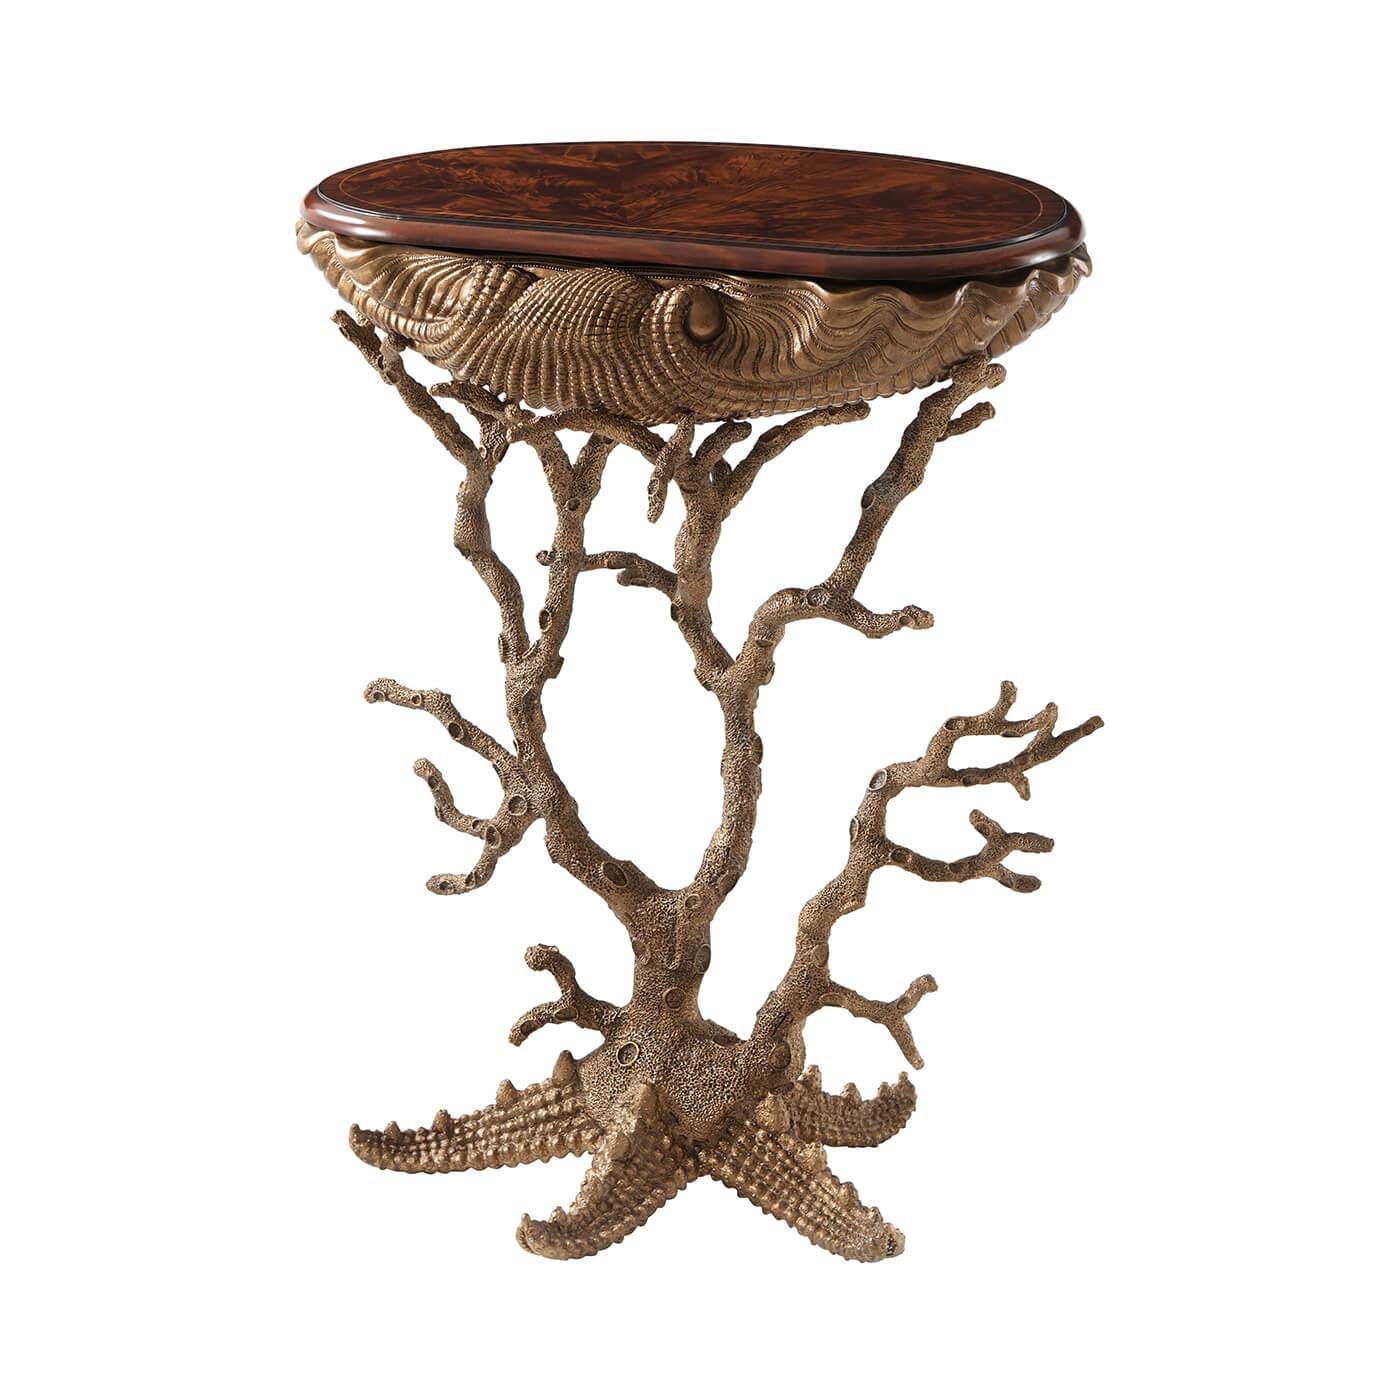 An unusual pair of Grotto tables, the rounded 'D' shaped flame mahogany and rosewood crossbanded top above a gilt metal cast base of a giant clamshell supported by coral legs issuing from a starfish. Inspired by Renaissance shell-decorated